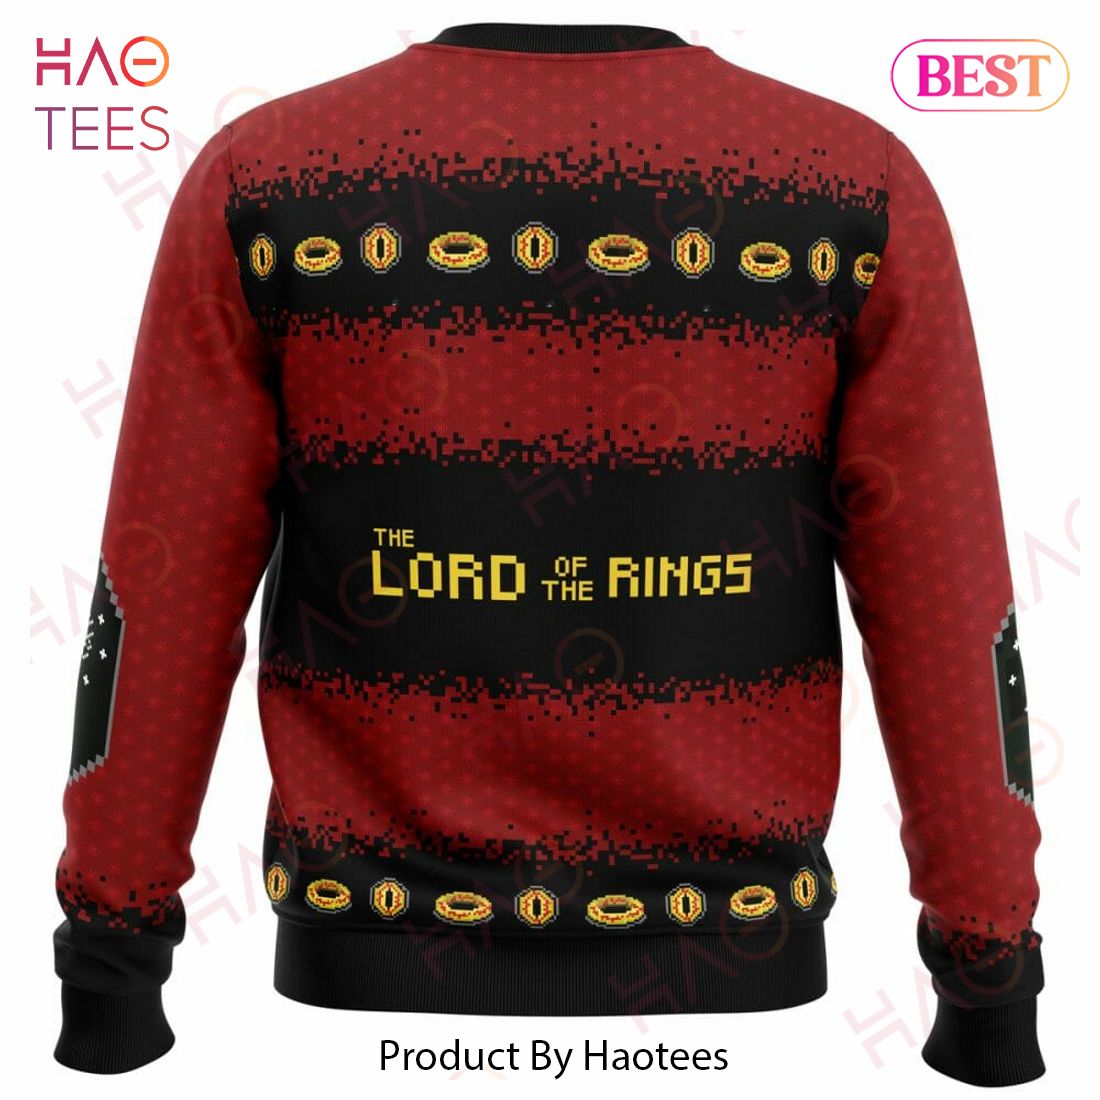 The Lord of the Rings Christmas Ugly Christmas Sweater